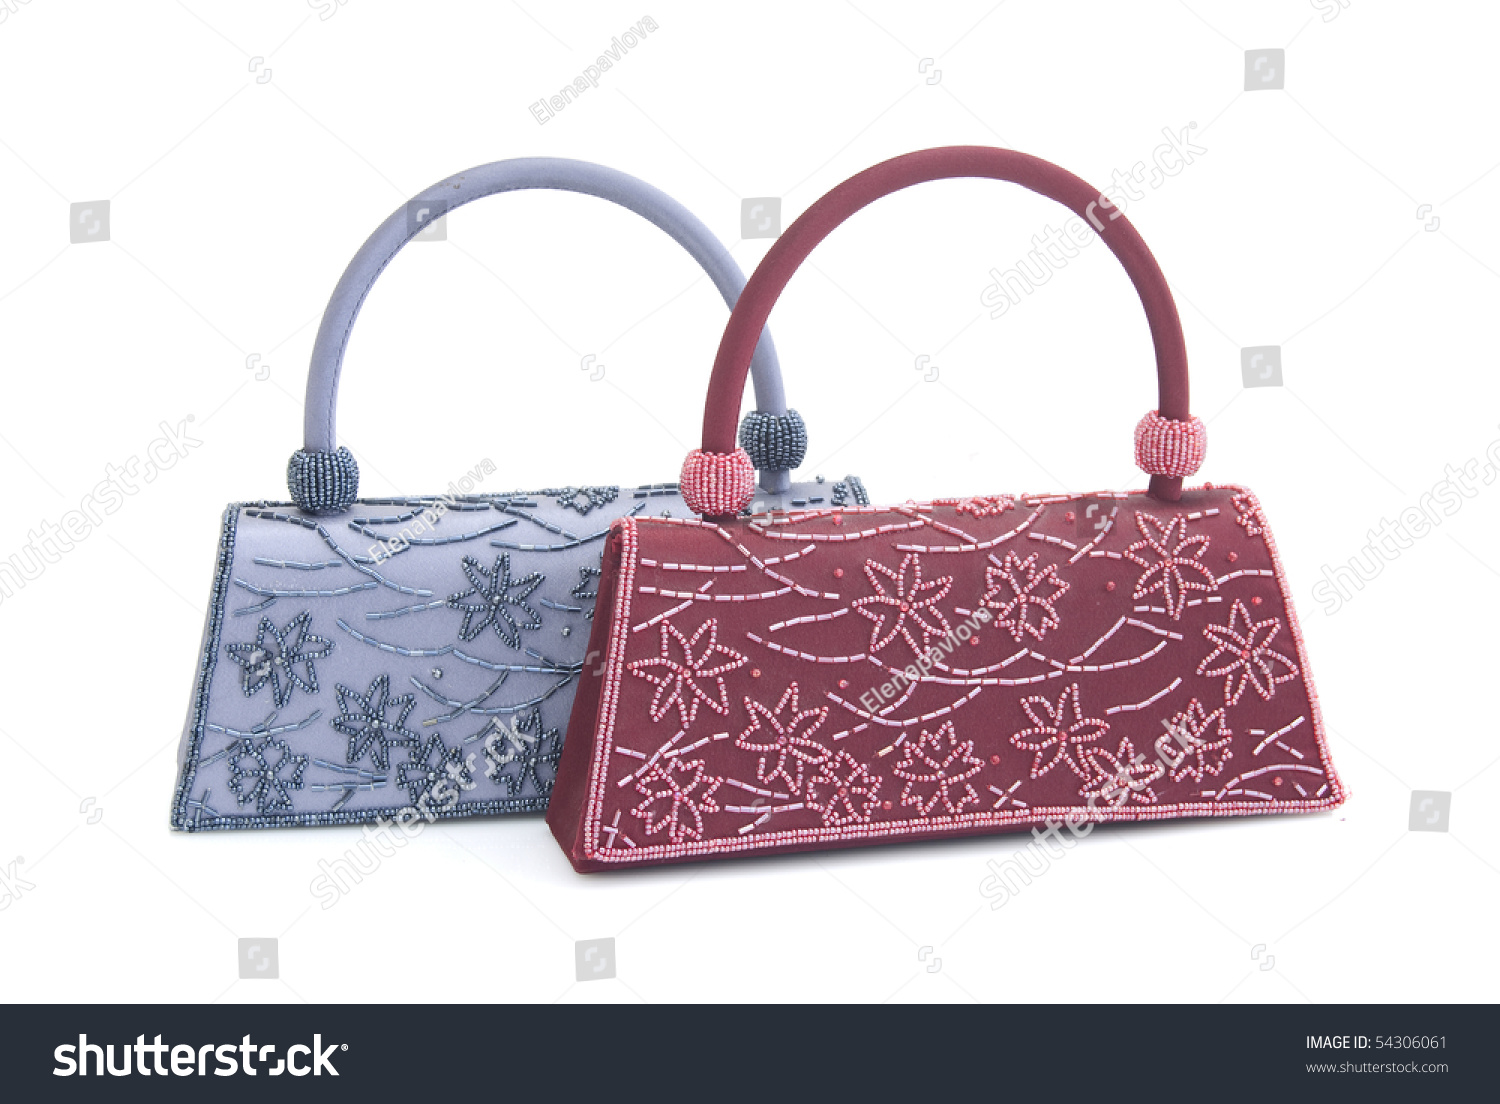 The Women Clutch Bags Isolated On White Background Stock Photo 54306061 : Shutterstock